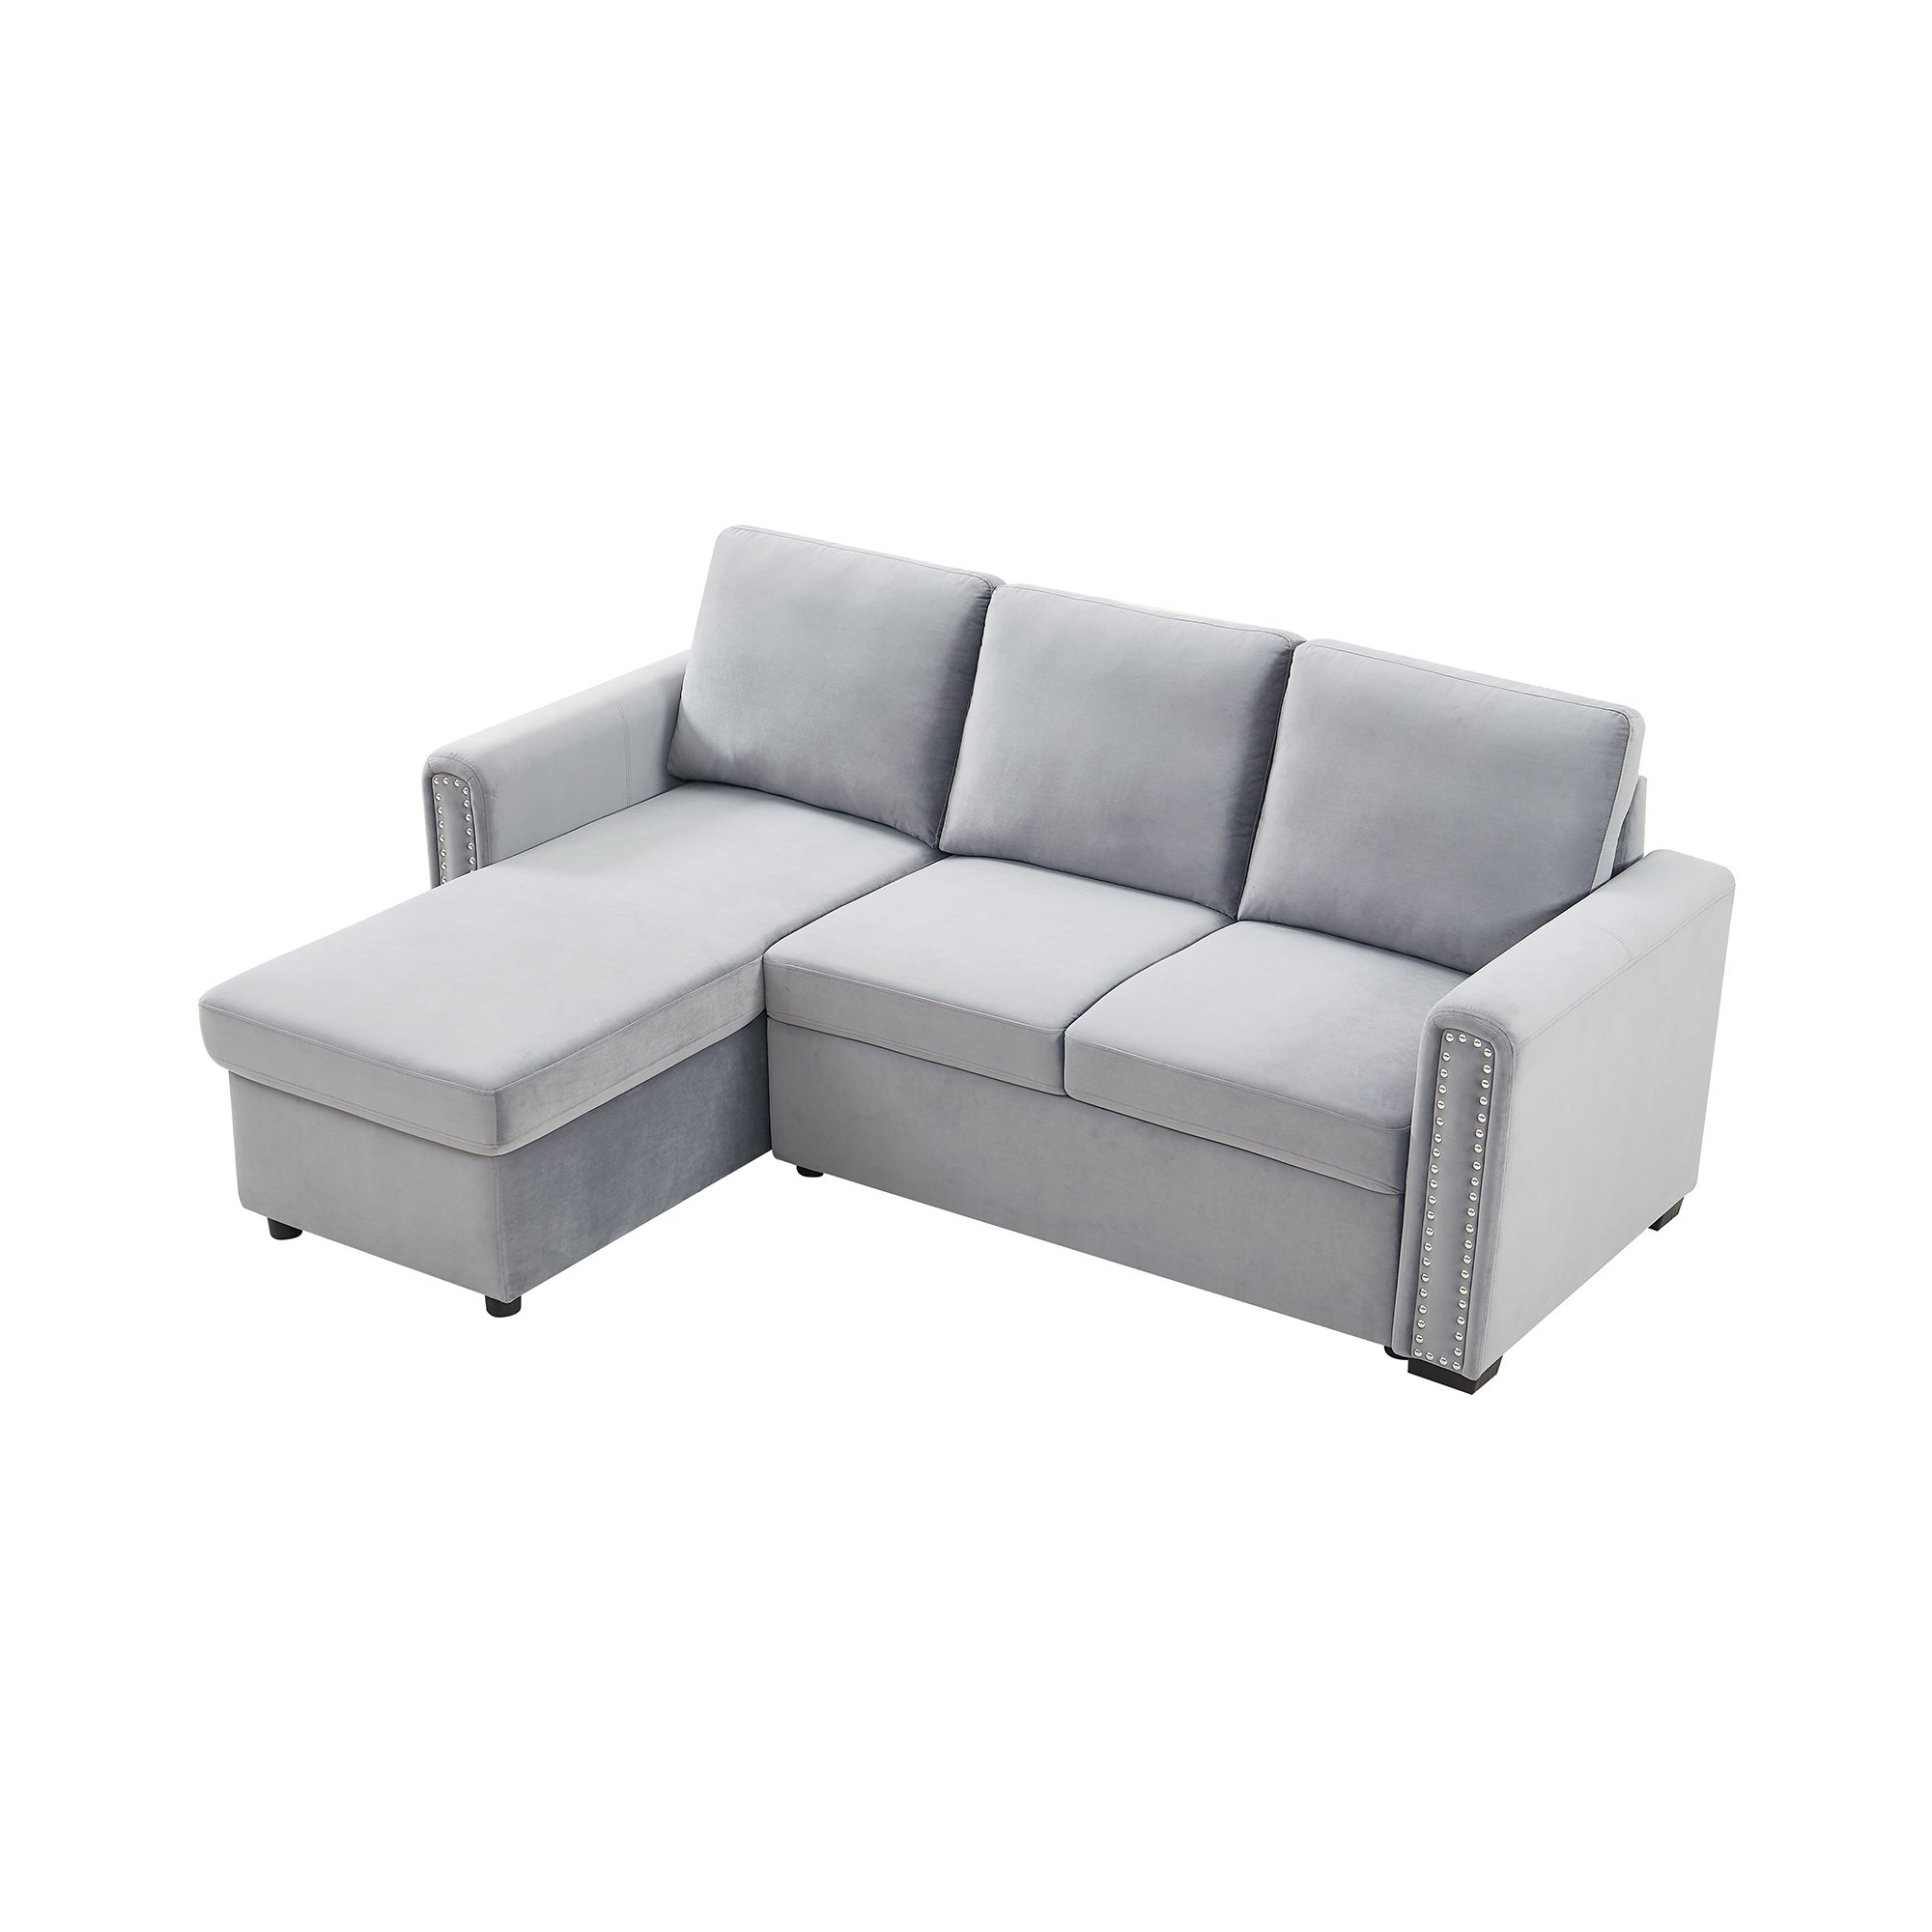 83" Convertible 3-Seater L-Shape Corner Sectional Sofa Couch with Storage-CASAINC